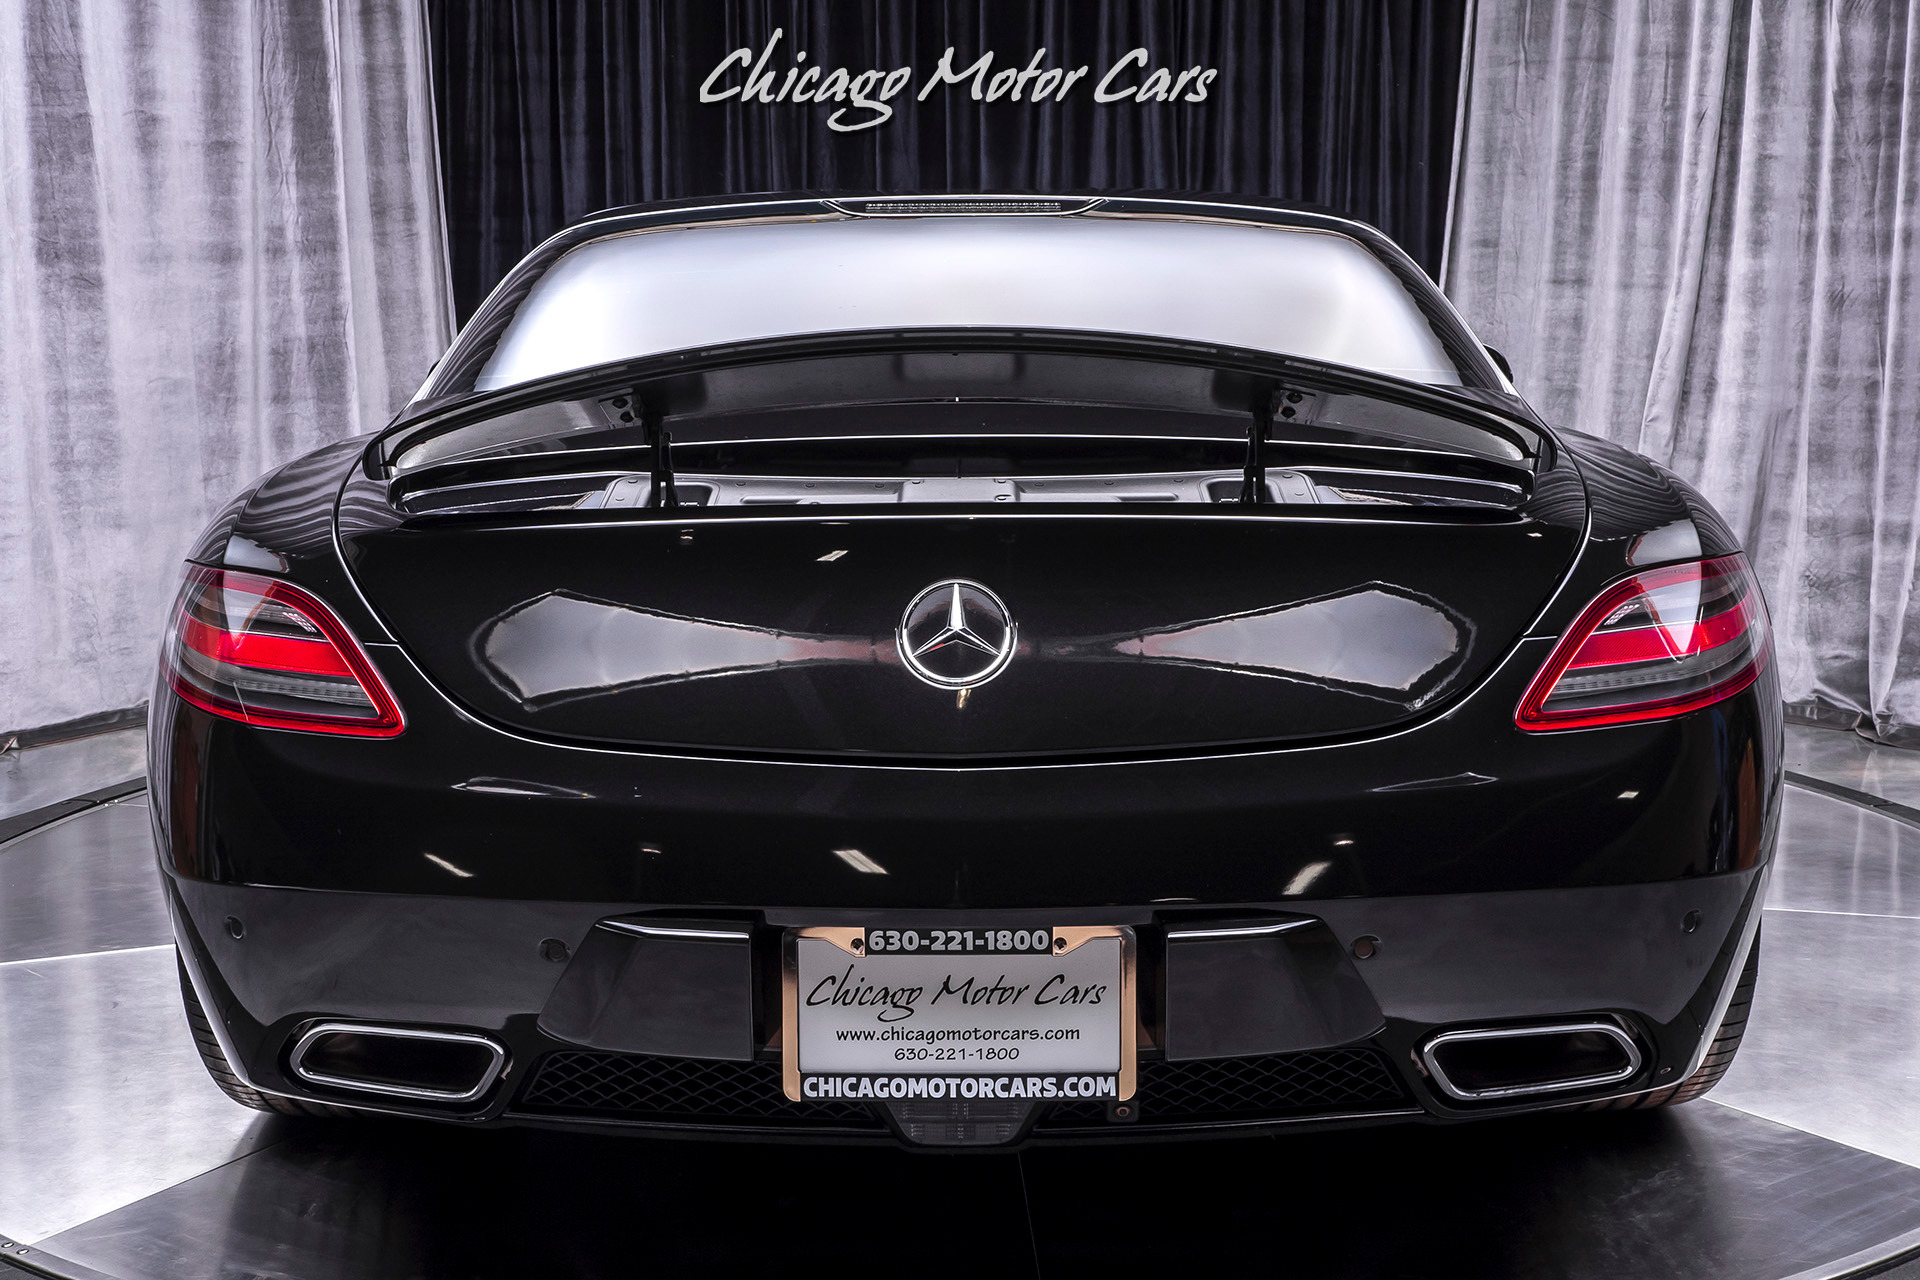 Used-2011-Mercedes-Benz-SLS-AMG-Gullwing-Coupe-MSRP-195K-BANG---OLUFSEN-SOUND-SYSTEM